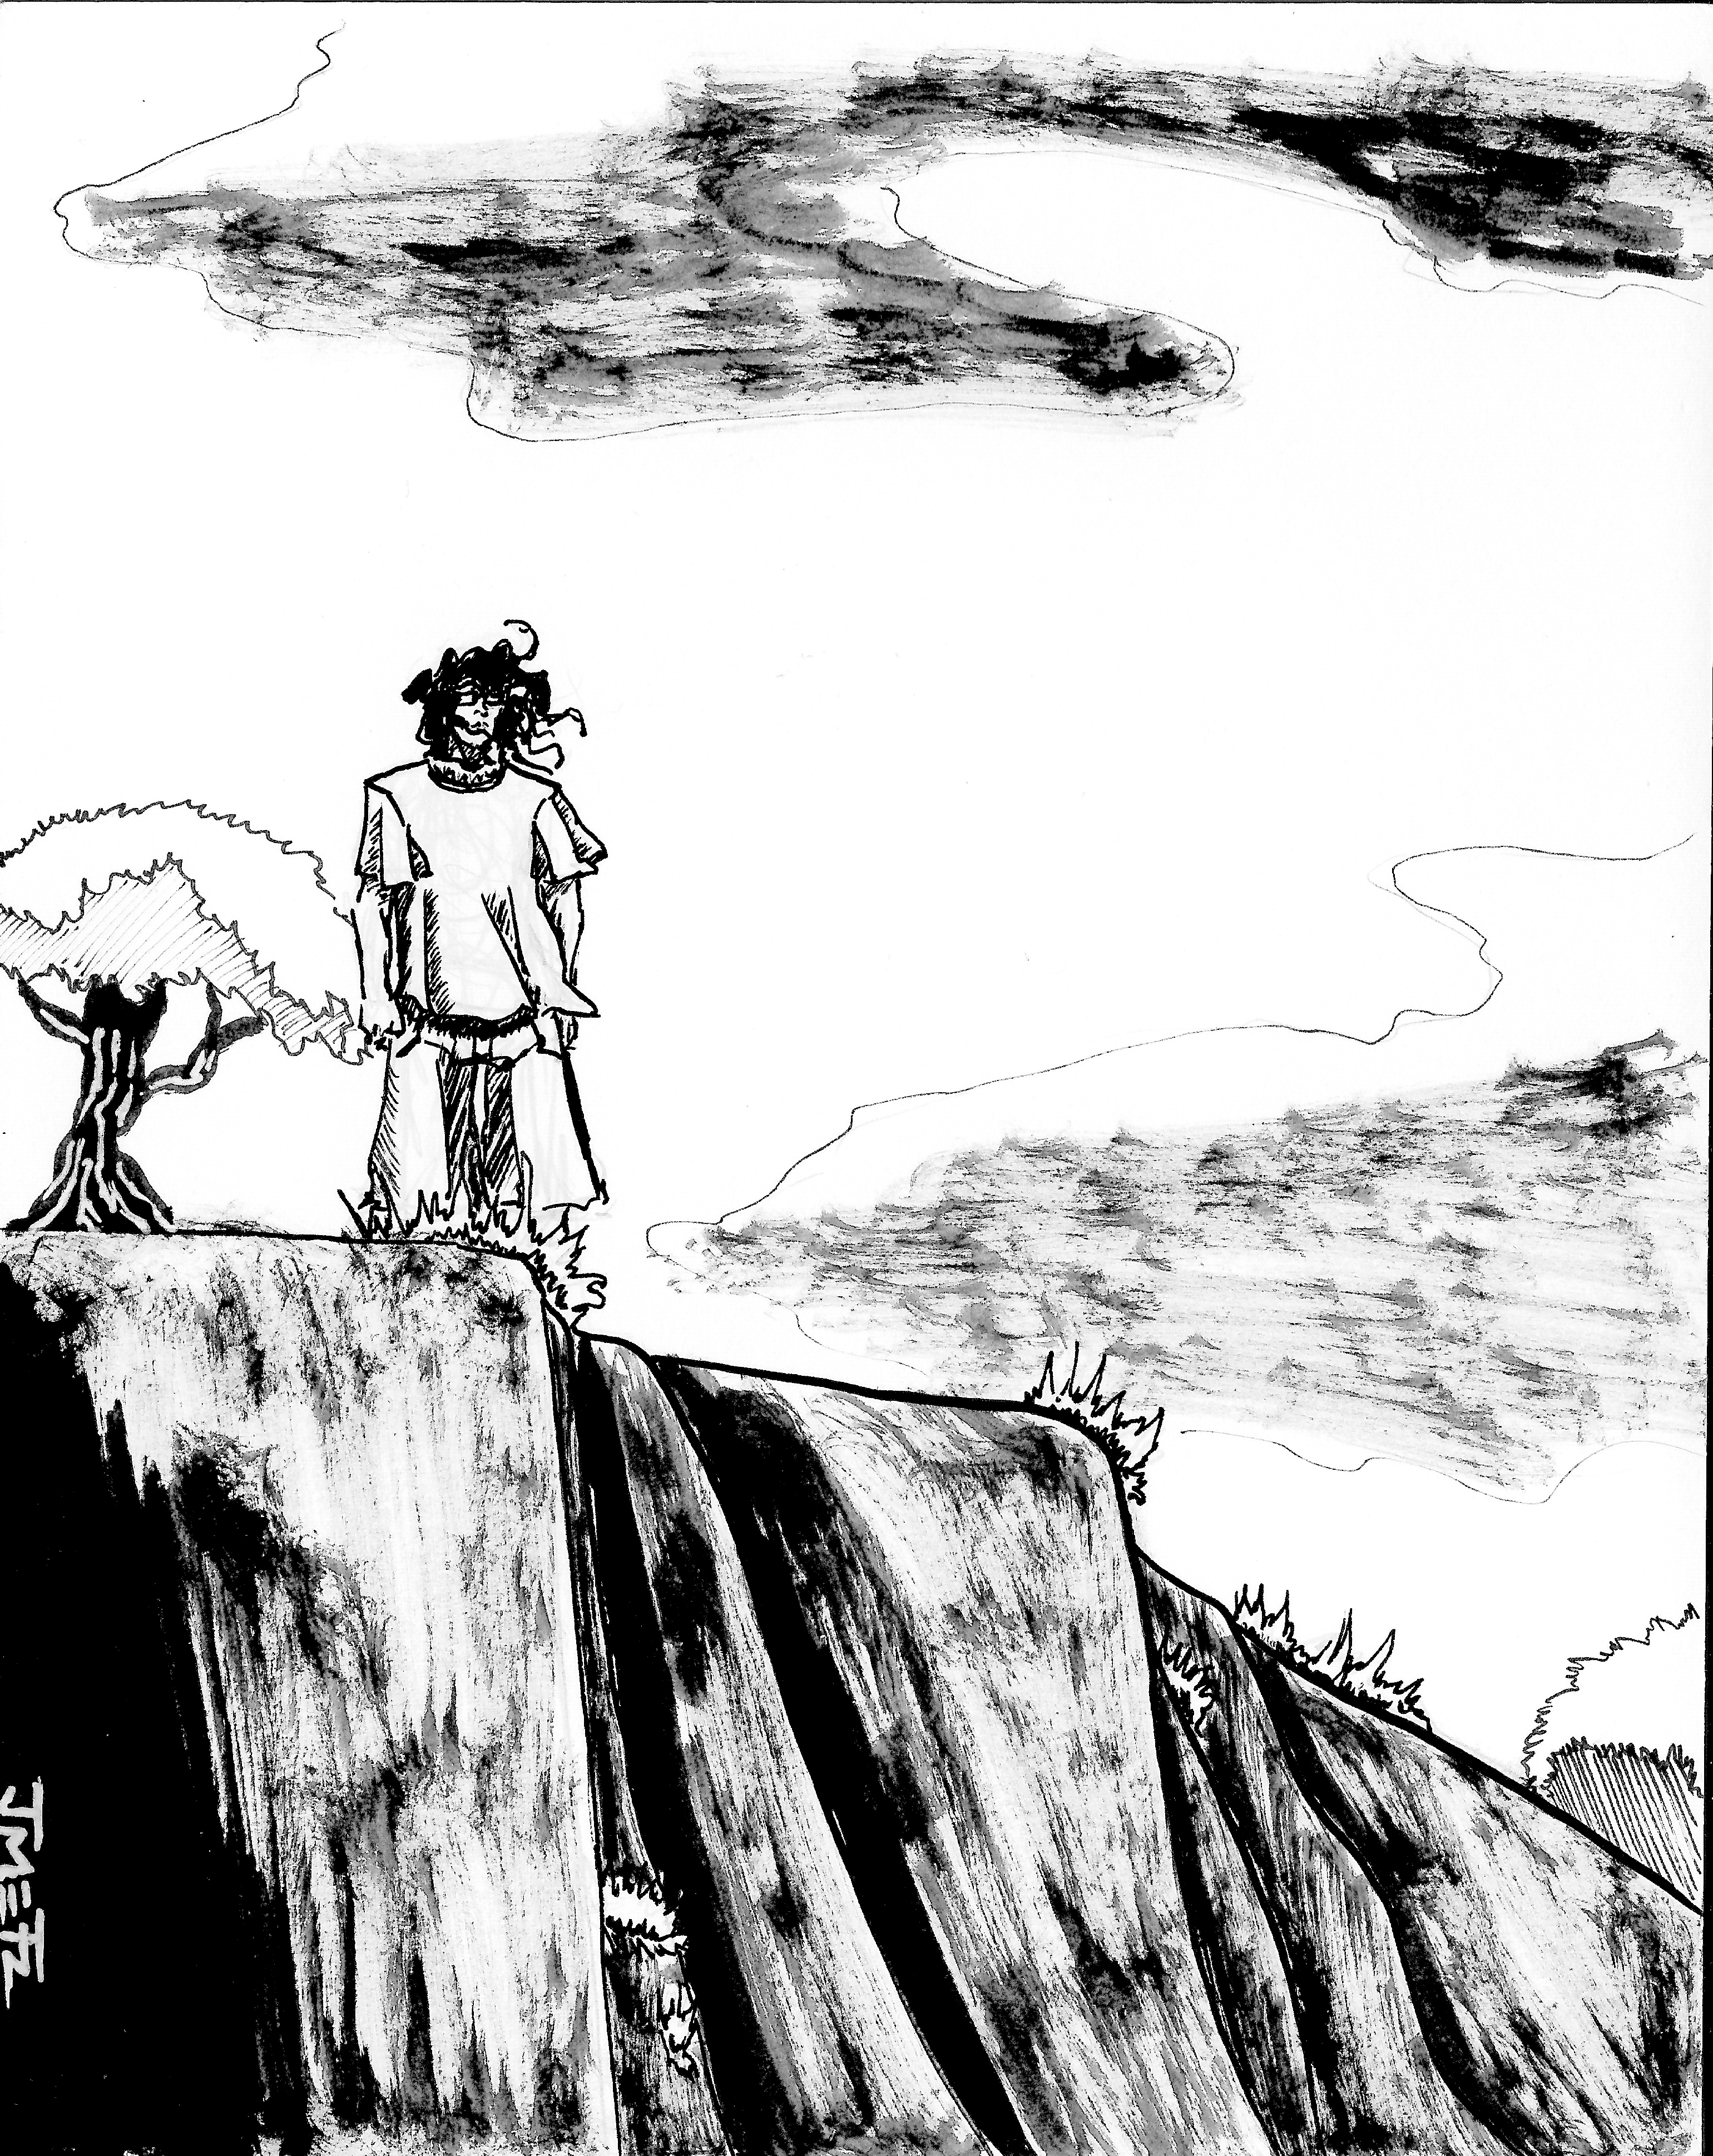 Man standing at the edge of a cliff